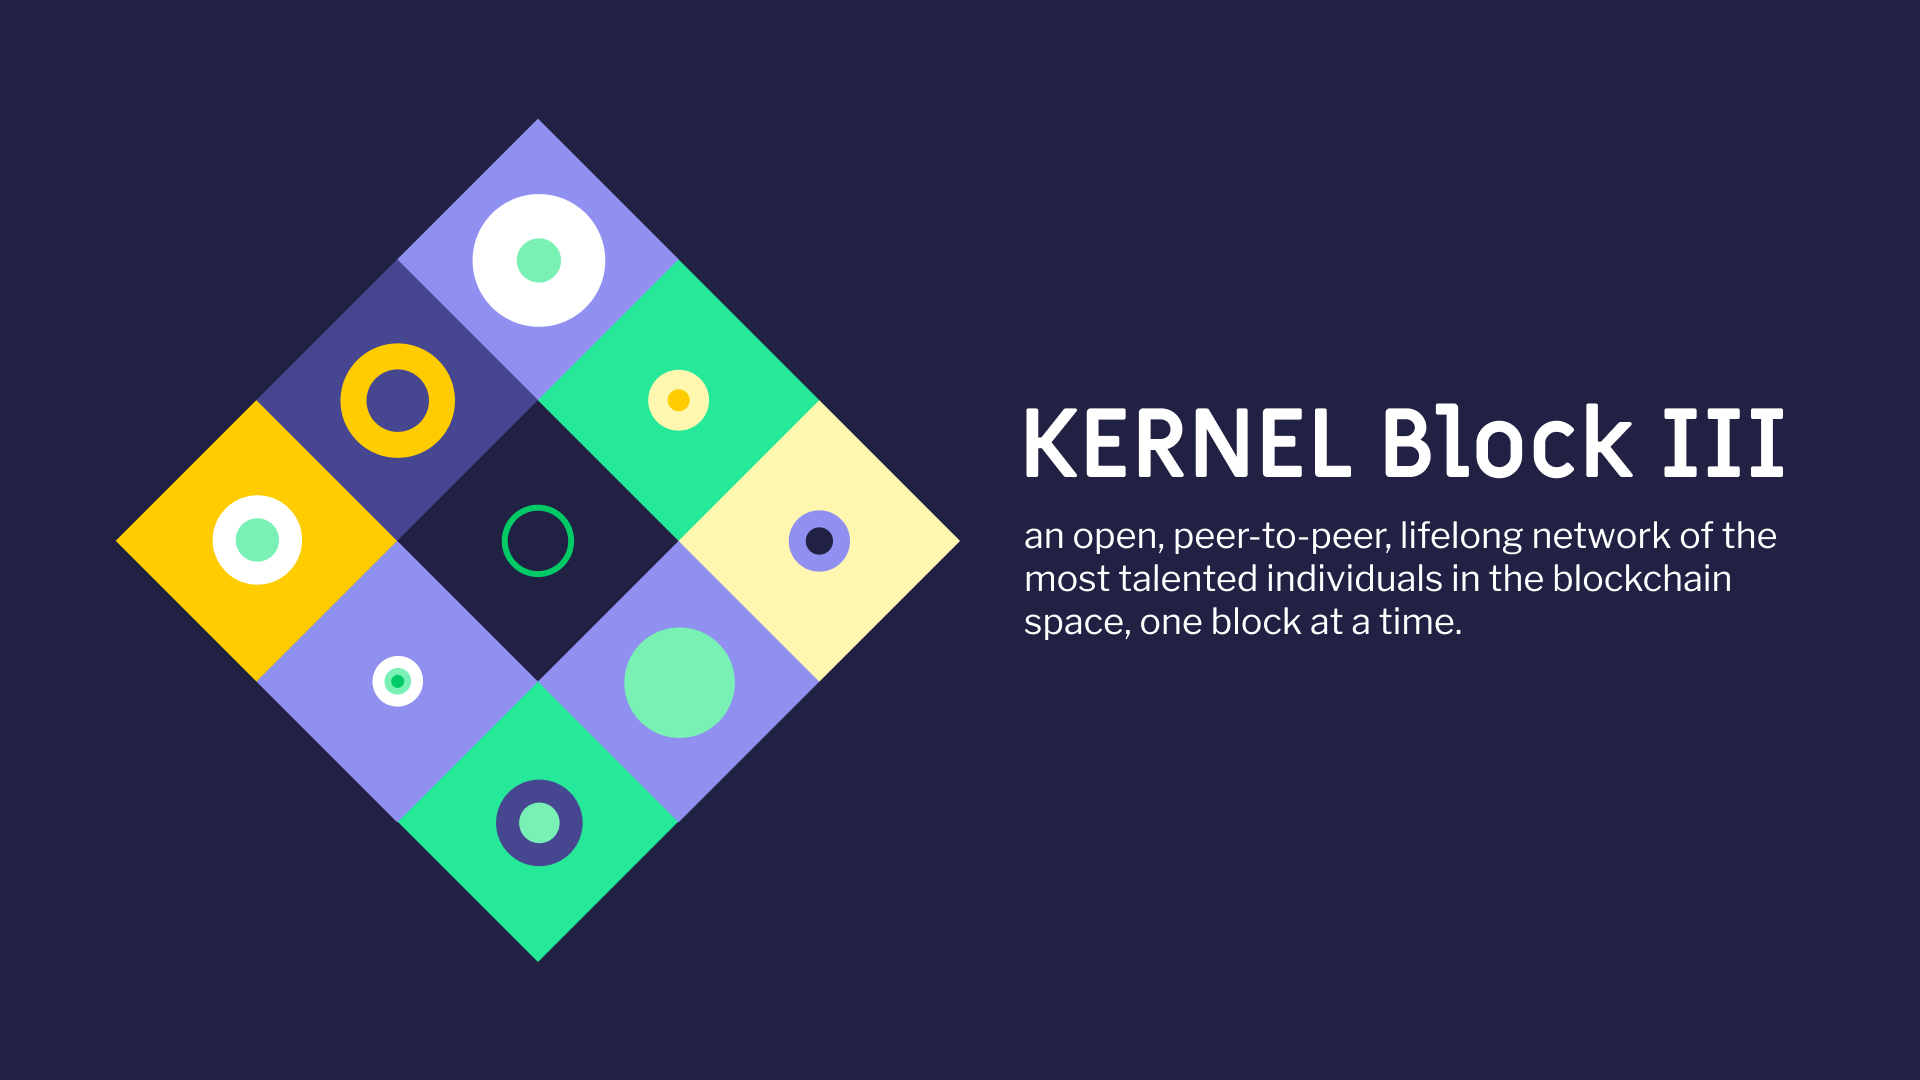 Kernel on X: KERNEL is made up of unique, incredible individuals. Genesis  Block included 200 builders from 48 countries building 75 Web 3 startups,  open source projects, and educational resources. The relationships